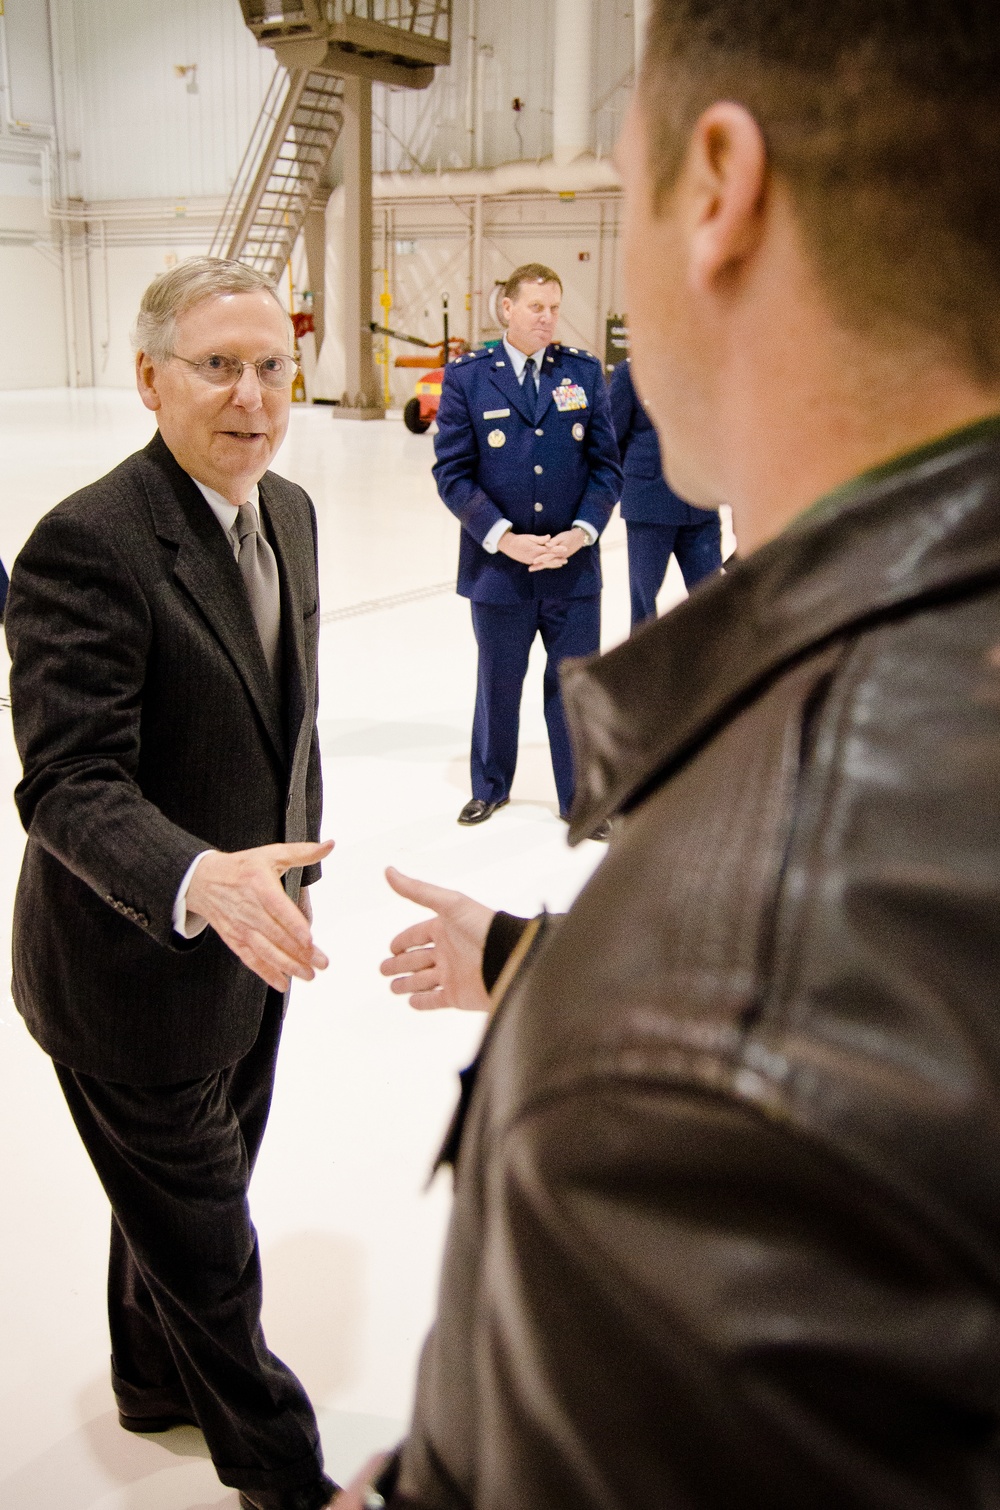 Sen. McConnell holds town hall meeting at Kentucky Air Guard Base